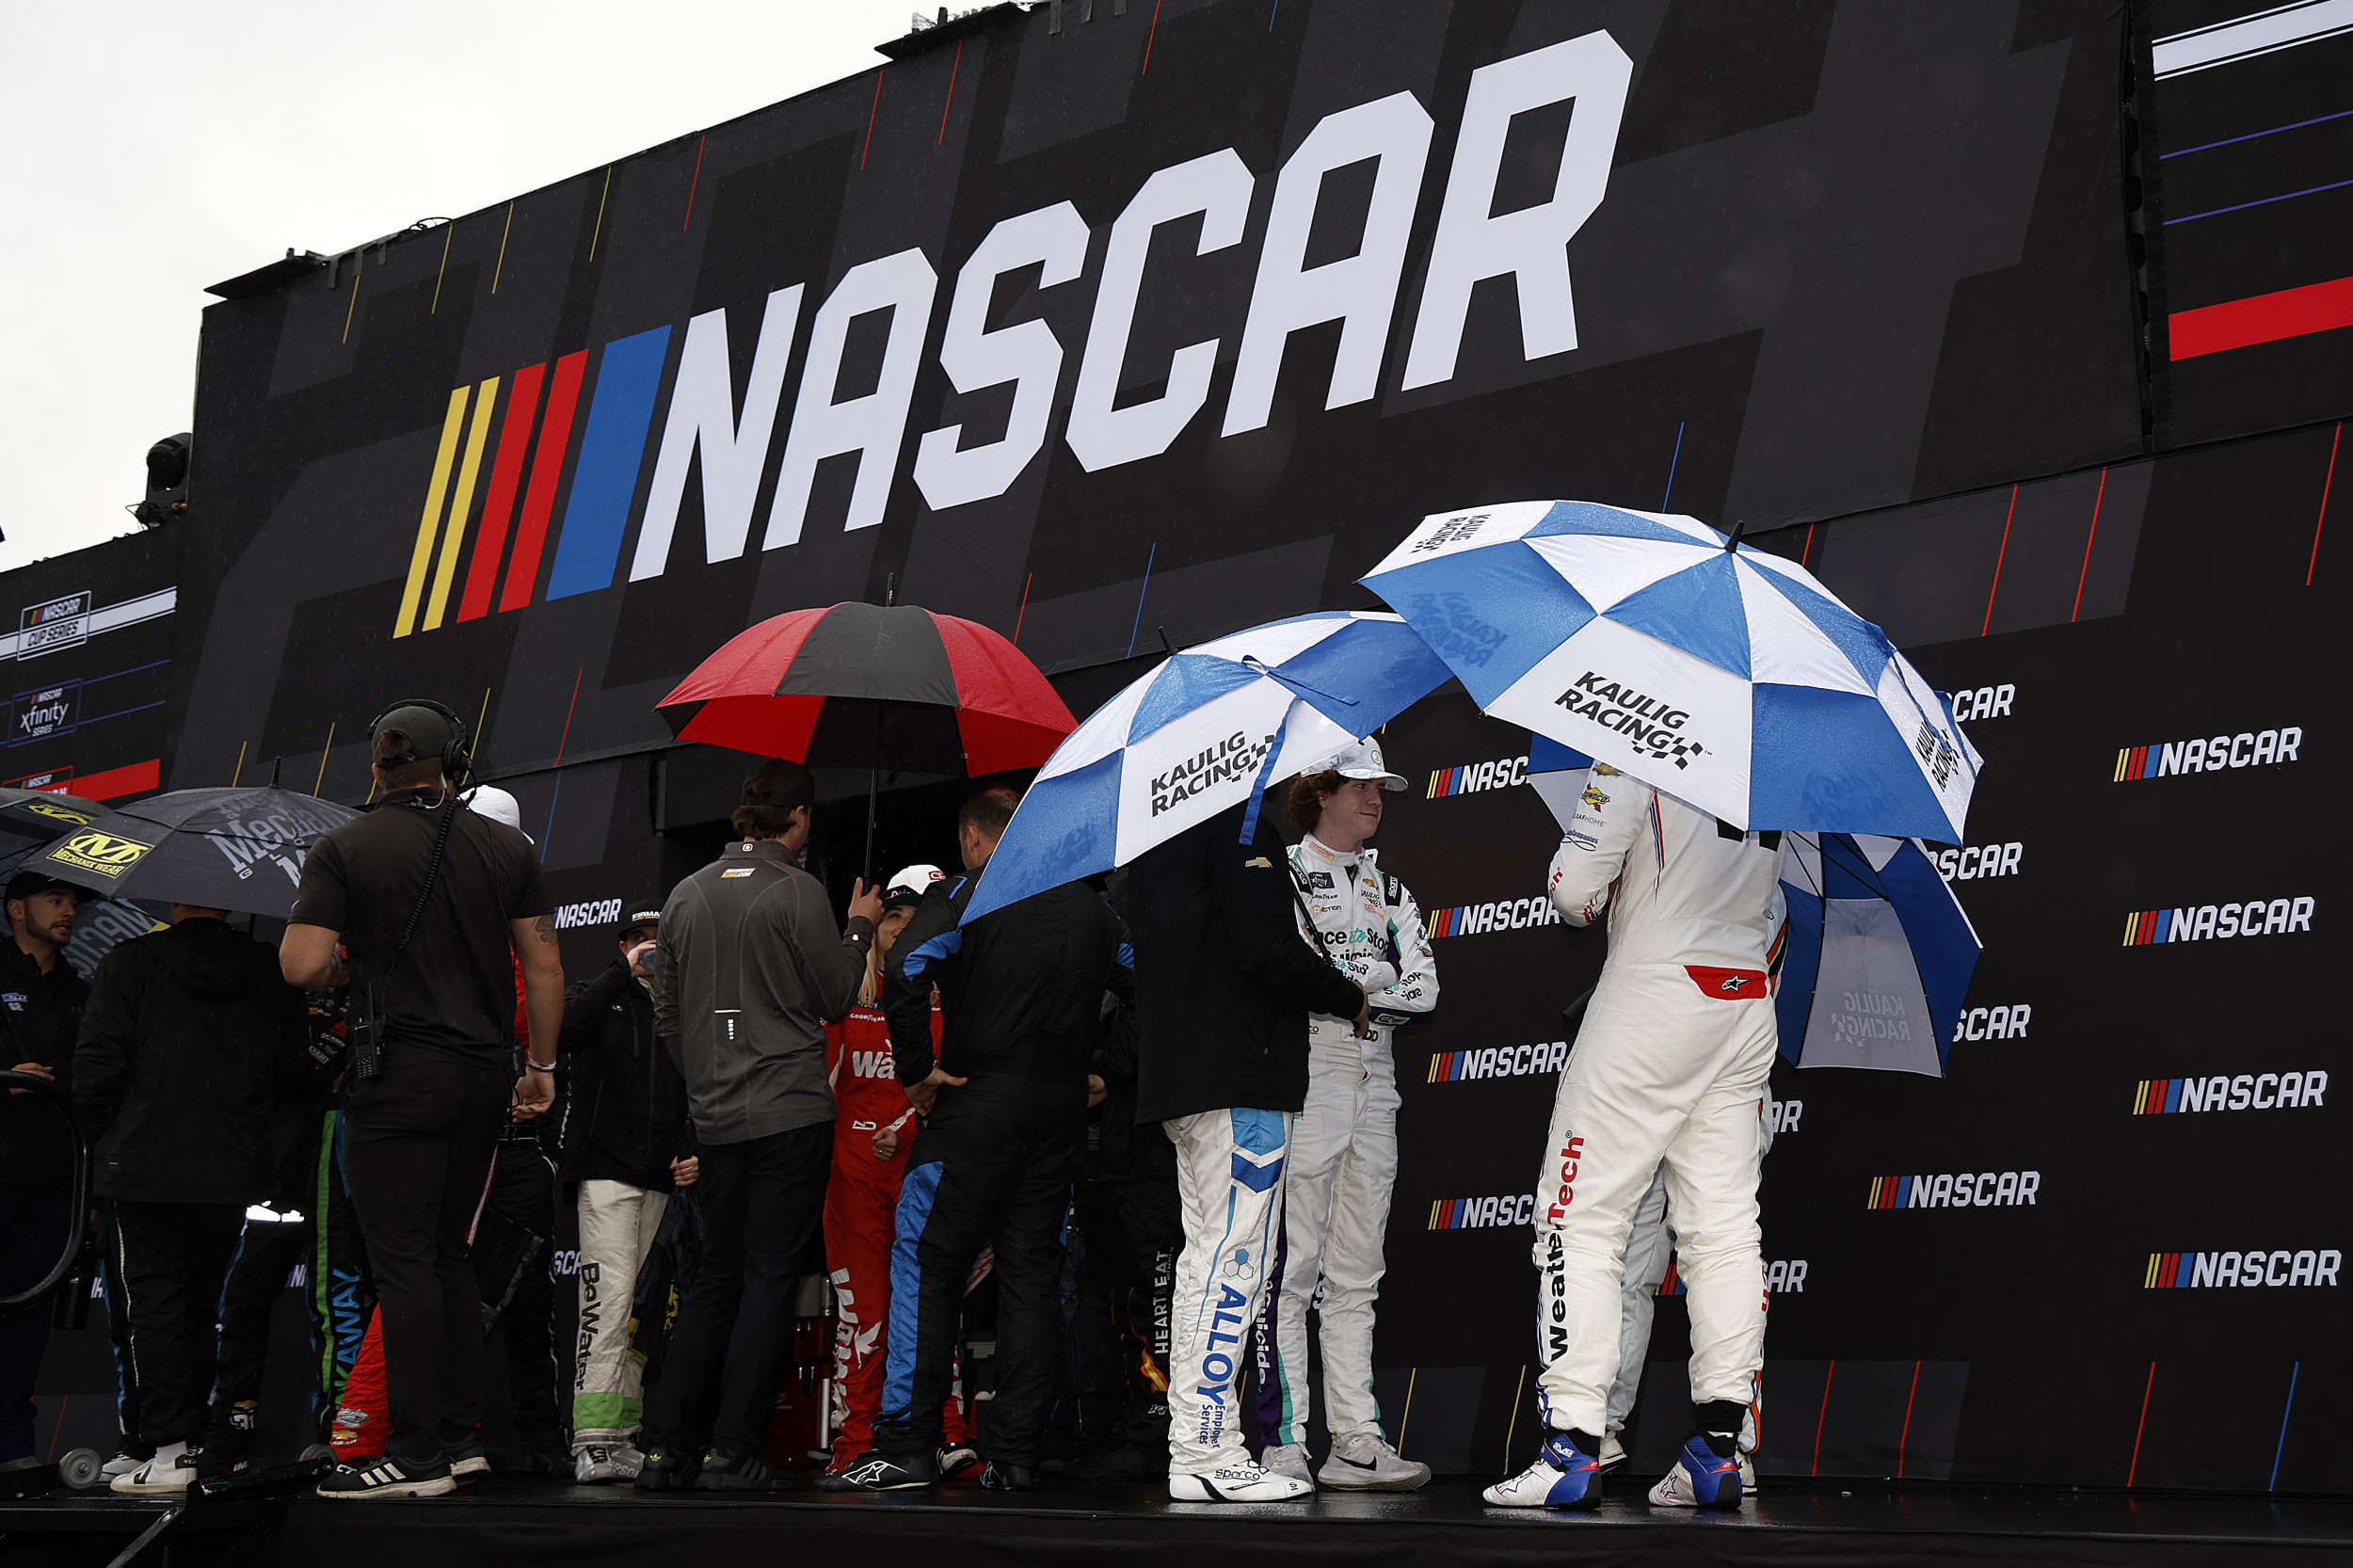 Why is the Daytona 500 not running?  Nascar race postponed due to weather